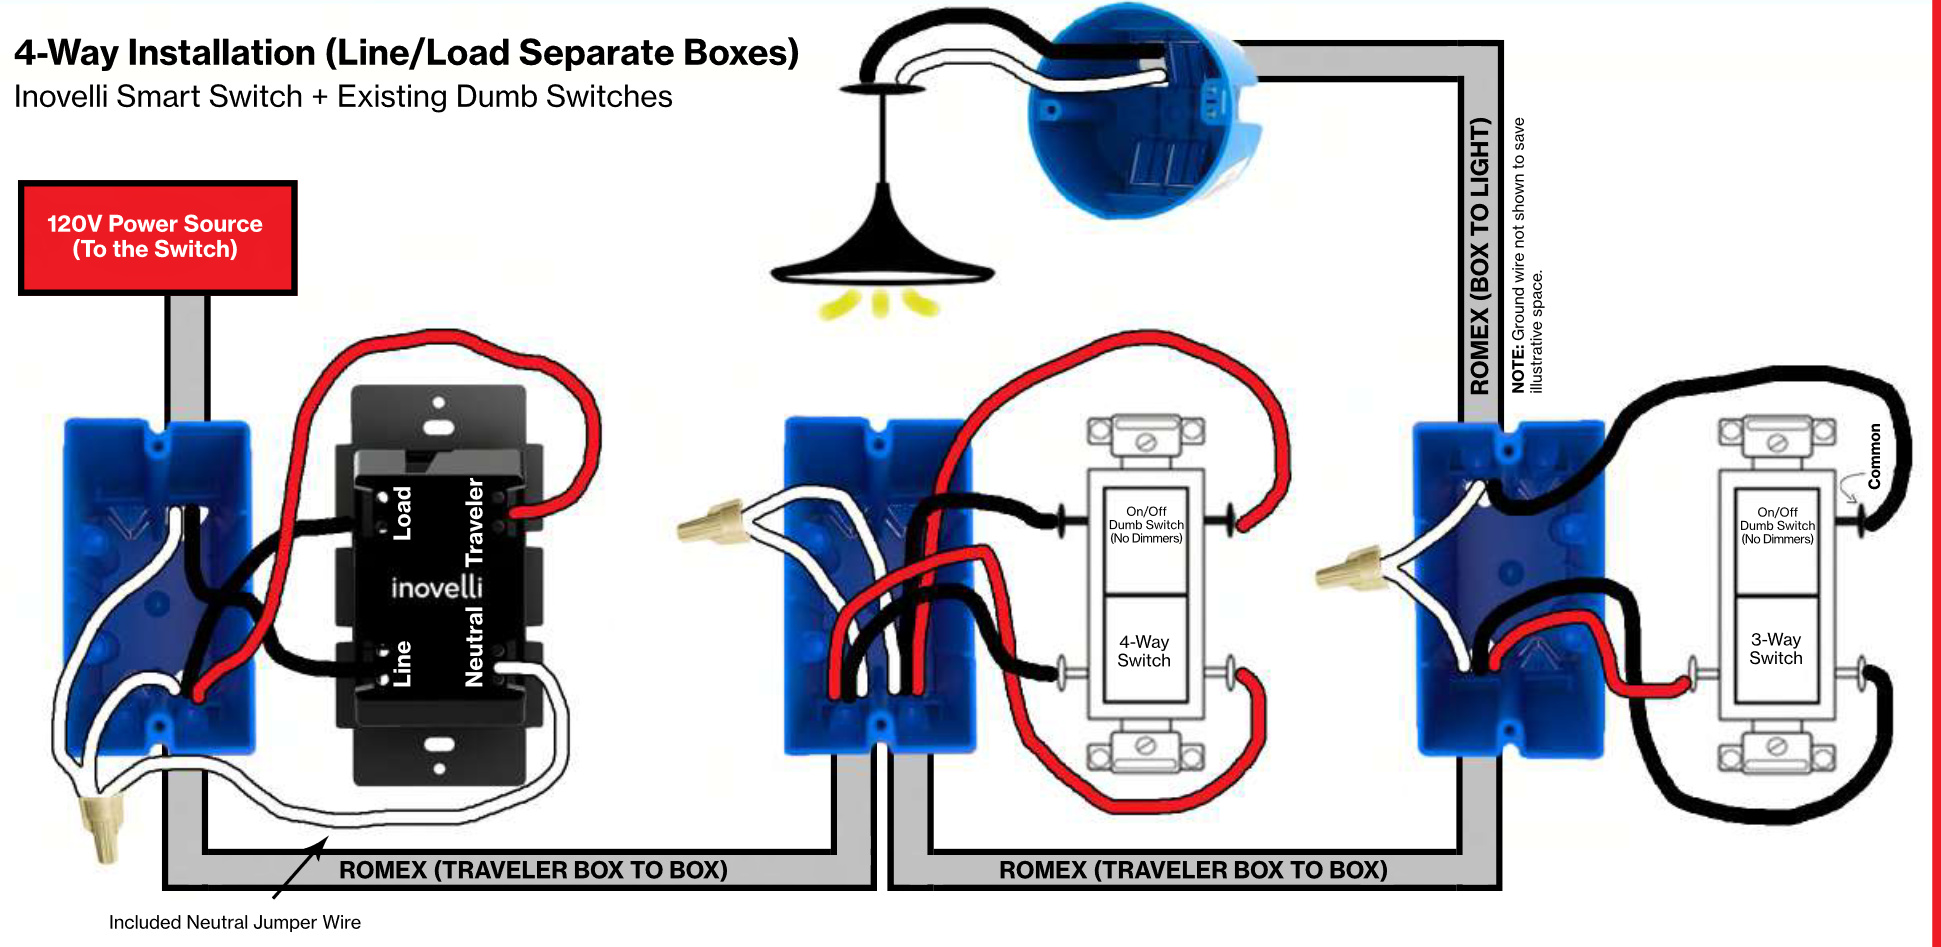 4 way setup help needed - Wiring Discussion - Inovelli Community